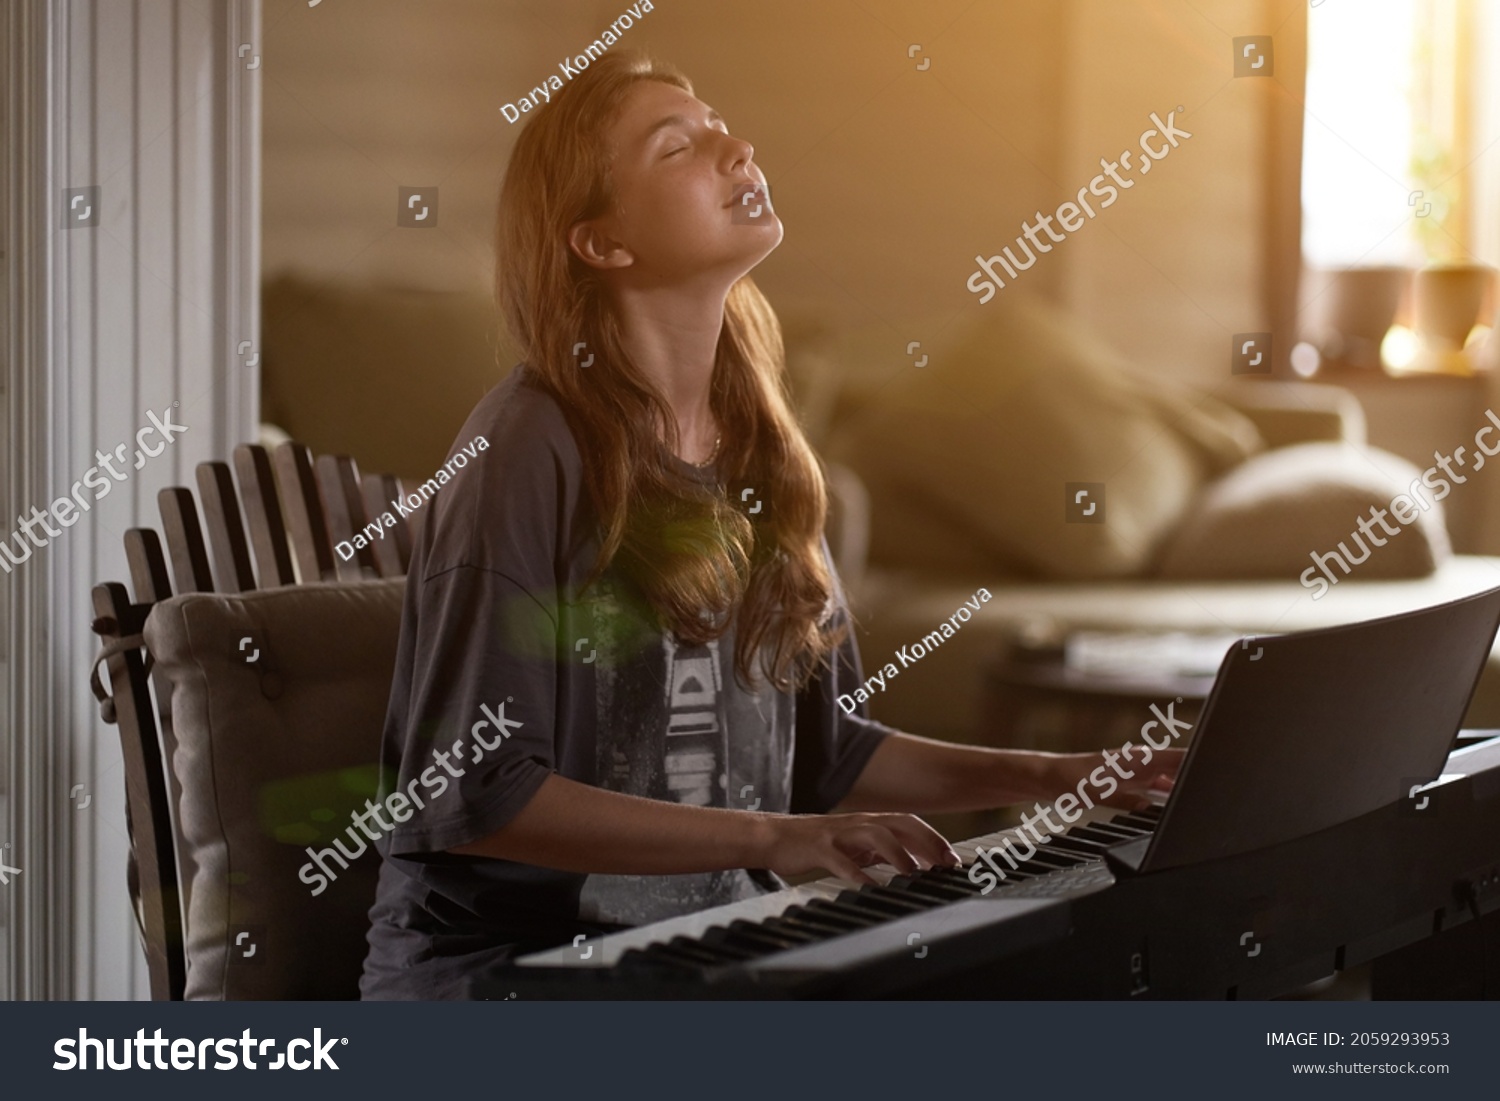 A young woman playing the piano.Close-up of a beautiful blonde girl with reddish-brown hair playing the piano creative, performance, musical concept, she wearing a T-shirt and playing a black piano. #2059293953